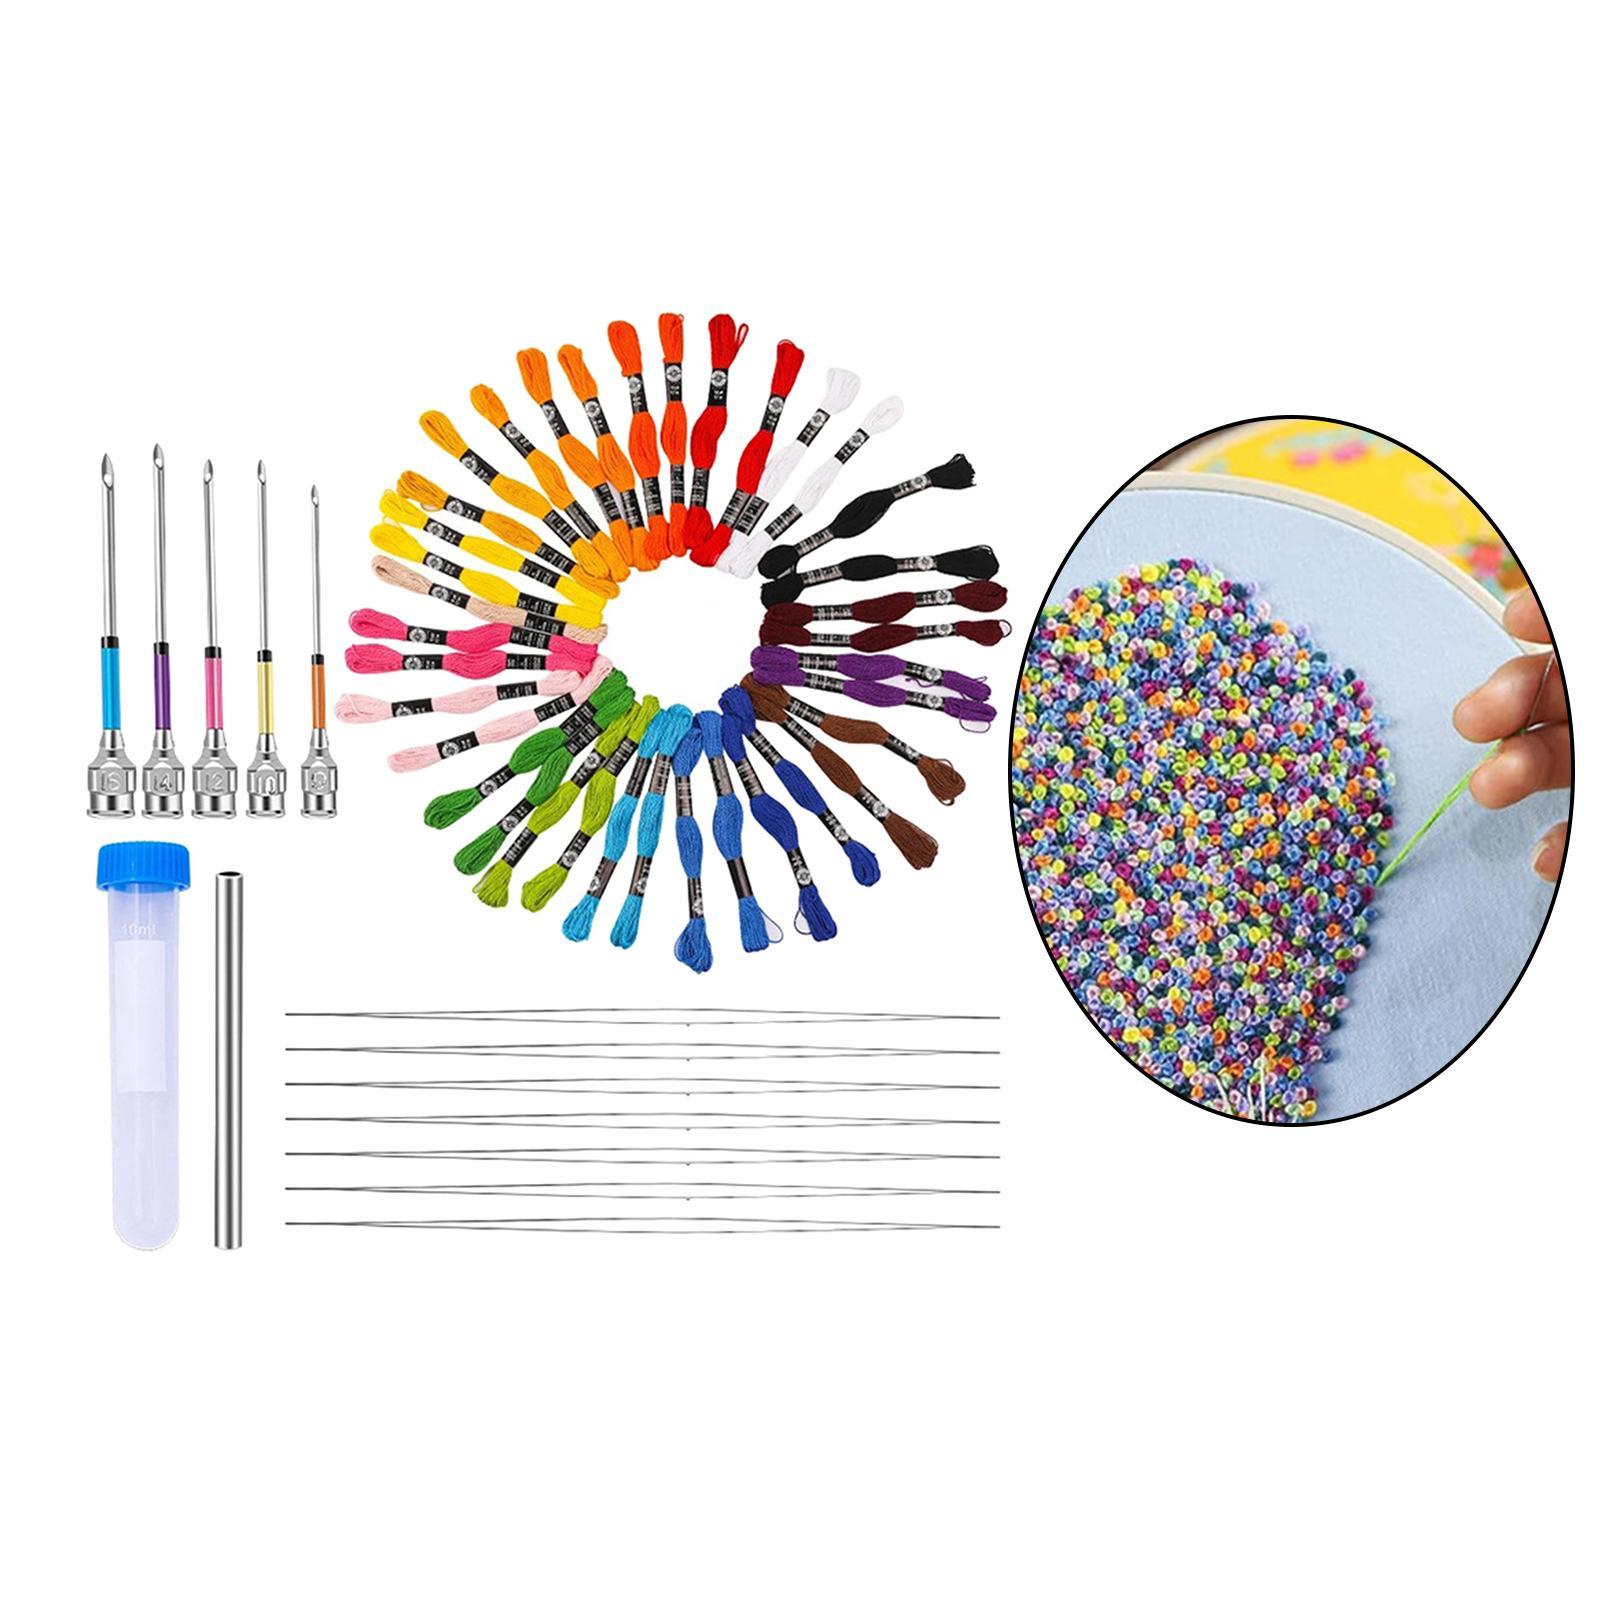 Embroidery Punch Needle, 62 Pcs Punch Needle Tool with Needle Punch, 48 Pcs Embroidery Thread, Embroidery Needles, Punch Needle Kit for Beginners